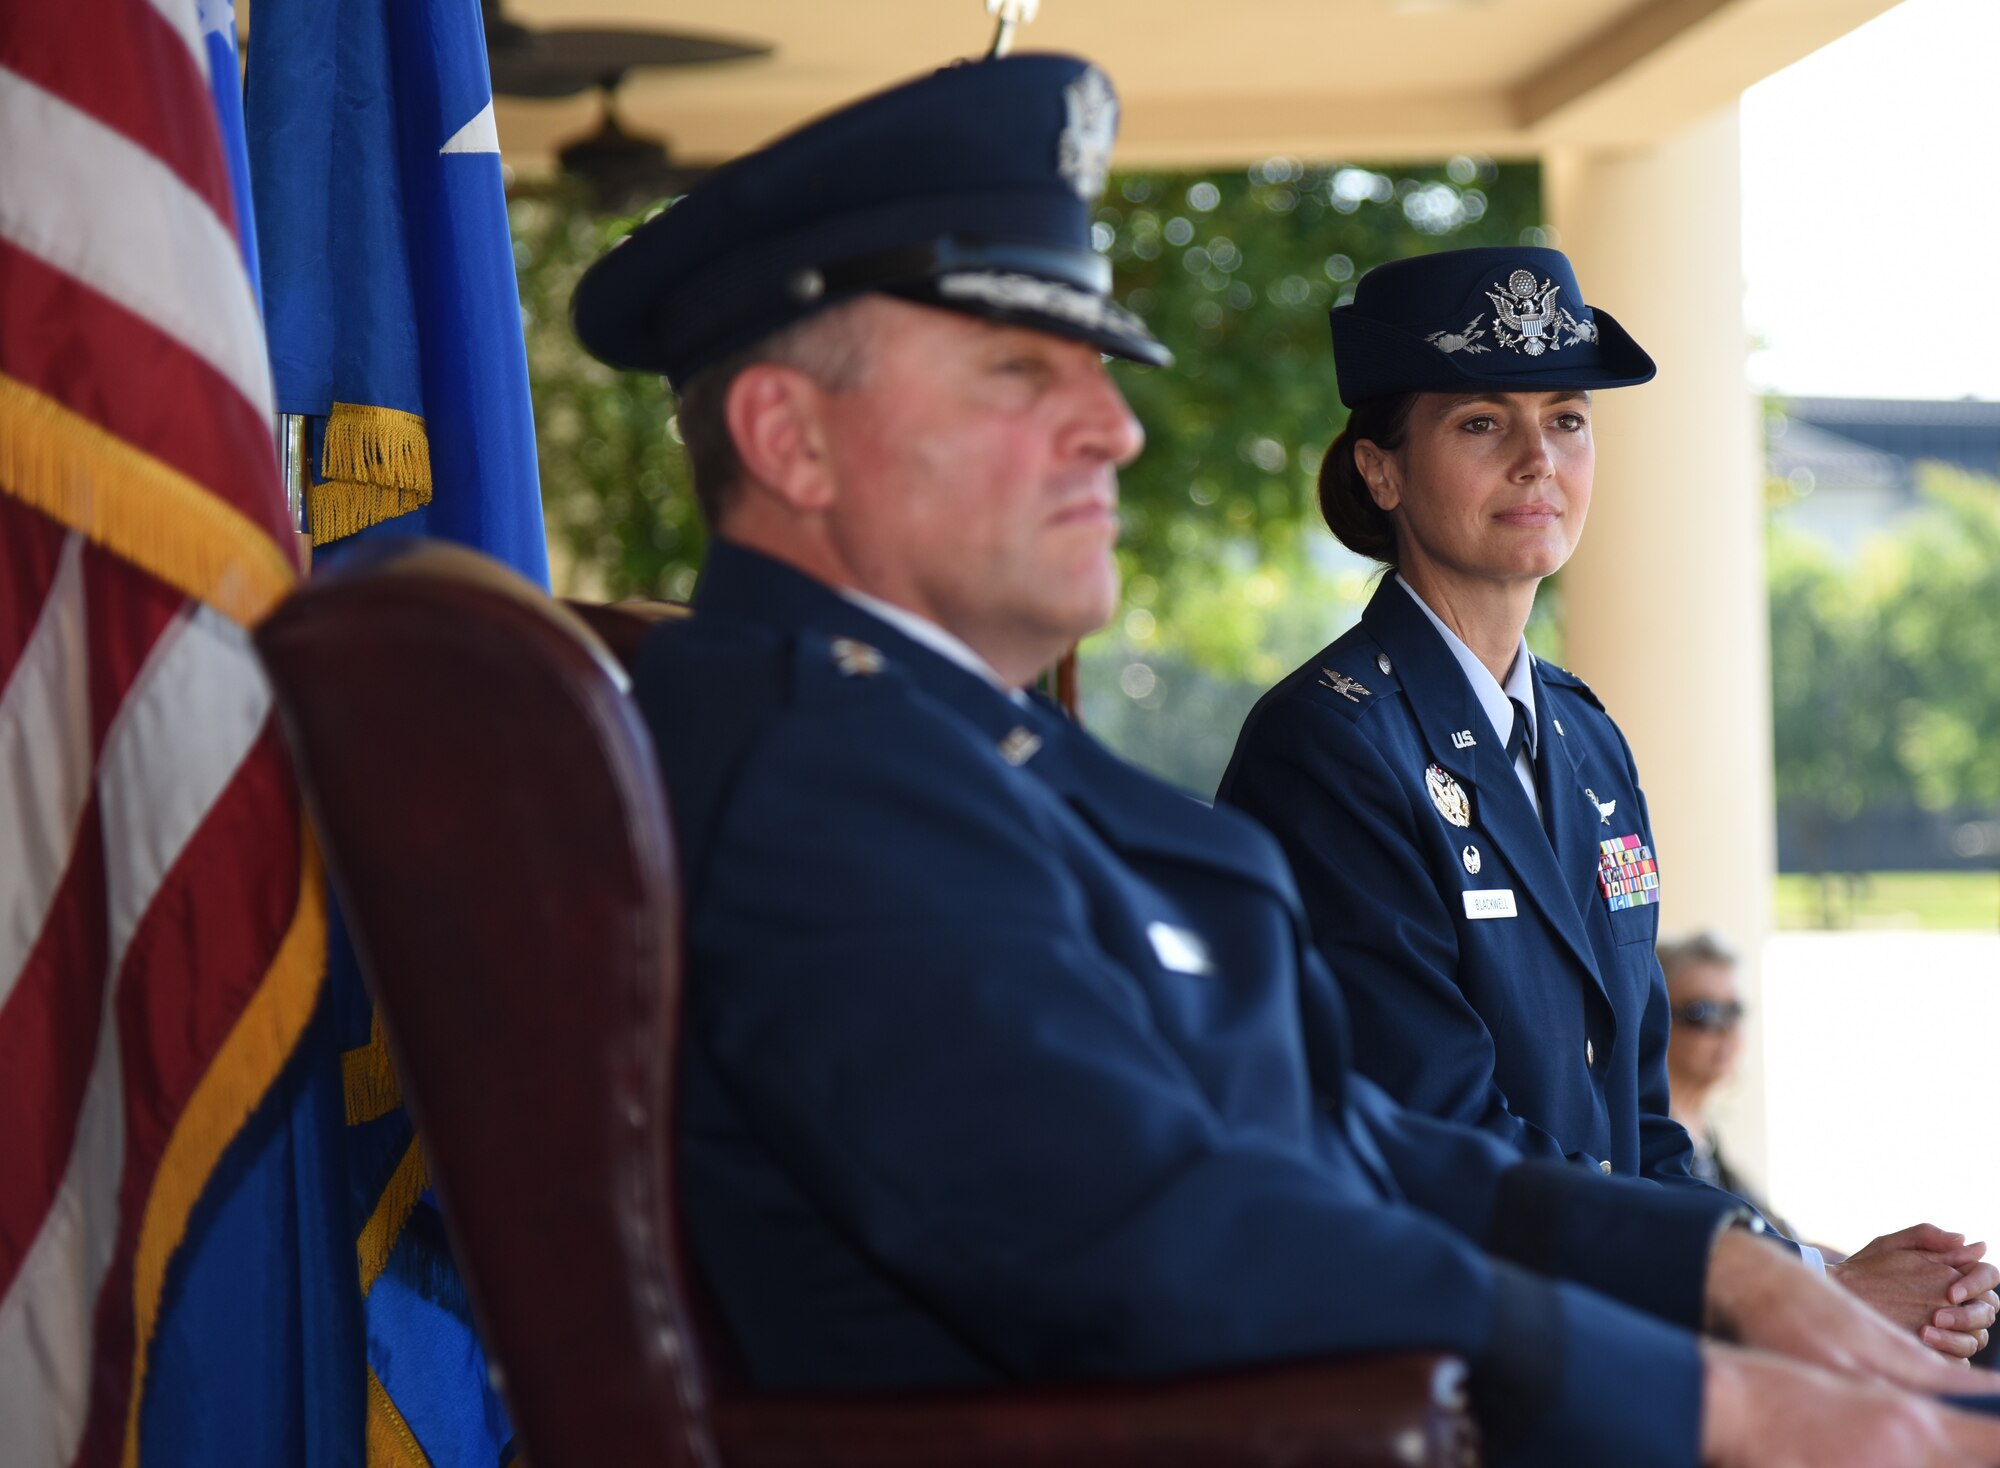 U.S. Air Force Maj. Gen. Timothy Leahy, Second Air Force commander, and Col. Heather Blackwell, incoming 81st Training Wing commander, look on as Col. Debra Lovette, outgoing 81st TRW commander, delivers her speech during the 81st TRW change of command ceremony on the Levitow Training Support Facility drill pad at Keesler Air Force Base, Mississippi, May 16, 2019. Blackwell assumed command from Col. Debra Lovette. (U.S. Air Force photo by Kemberly Groue)